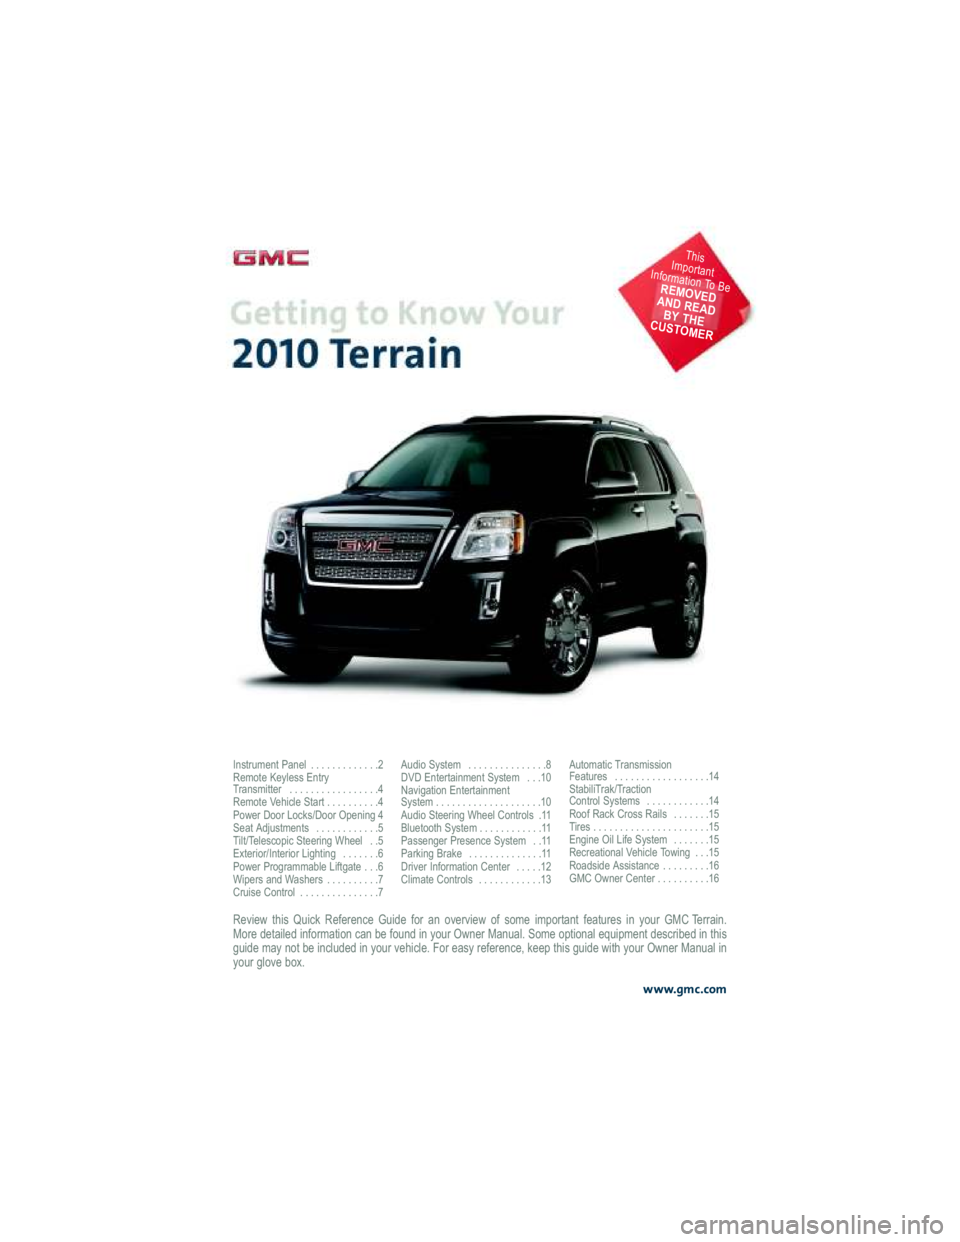 GMC TERRAIN 2010  Owners Manual Review  this  Quick  Reference  Guide  for  an  overview  of  some important  features  in  your  GMC Terrain. 
More detailed information can be found in your Owner Manual . Some optional equipment de